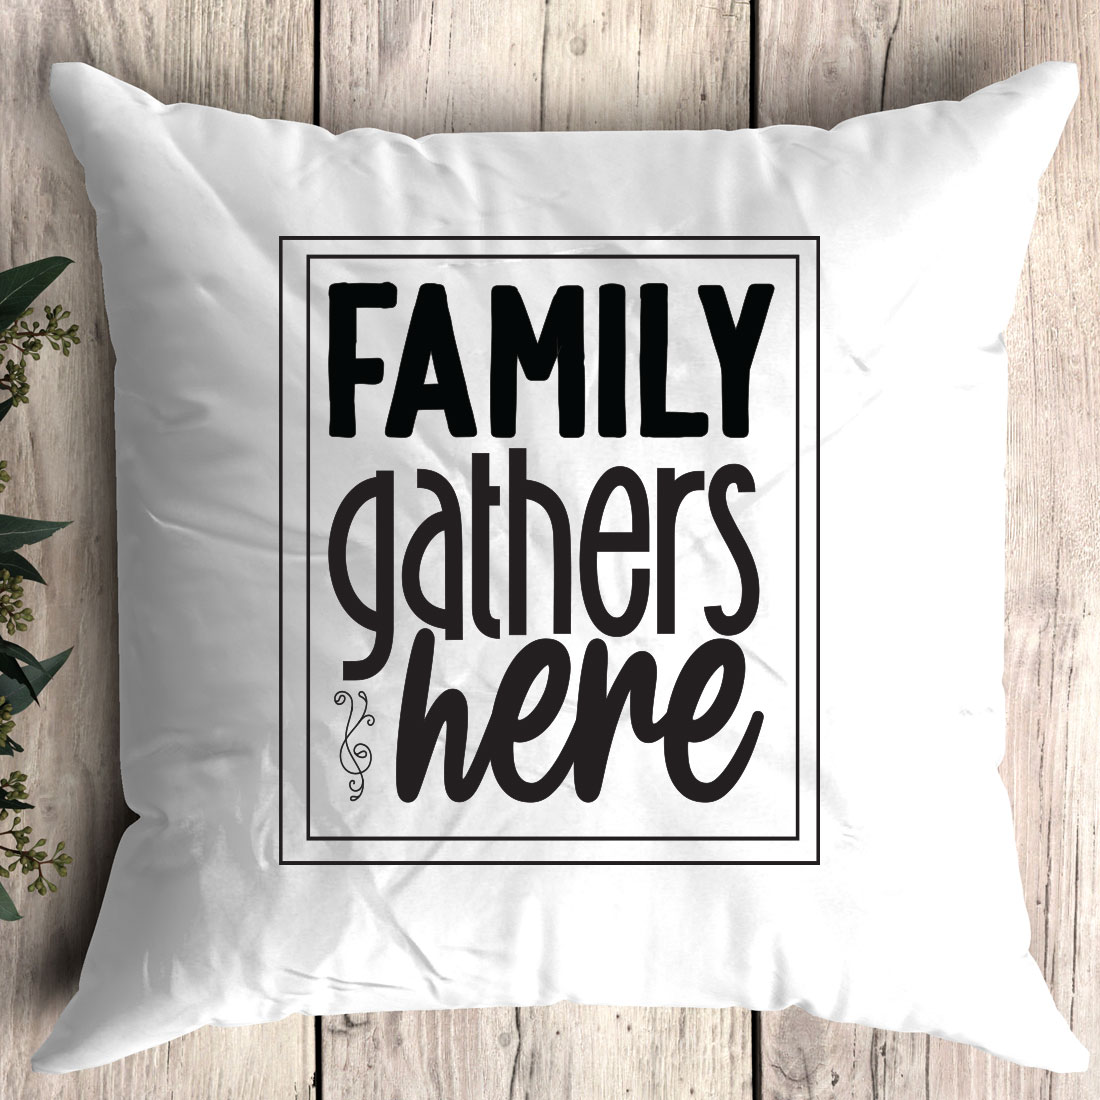 Pillow with the words family gathers here on it.